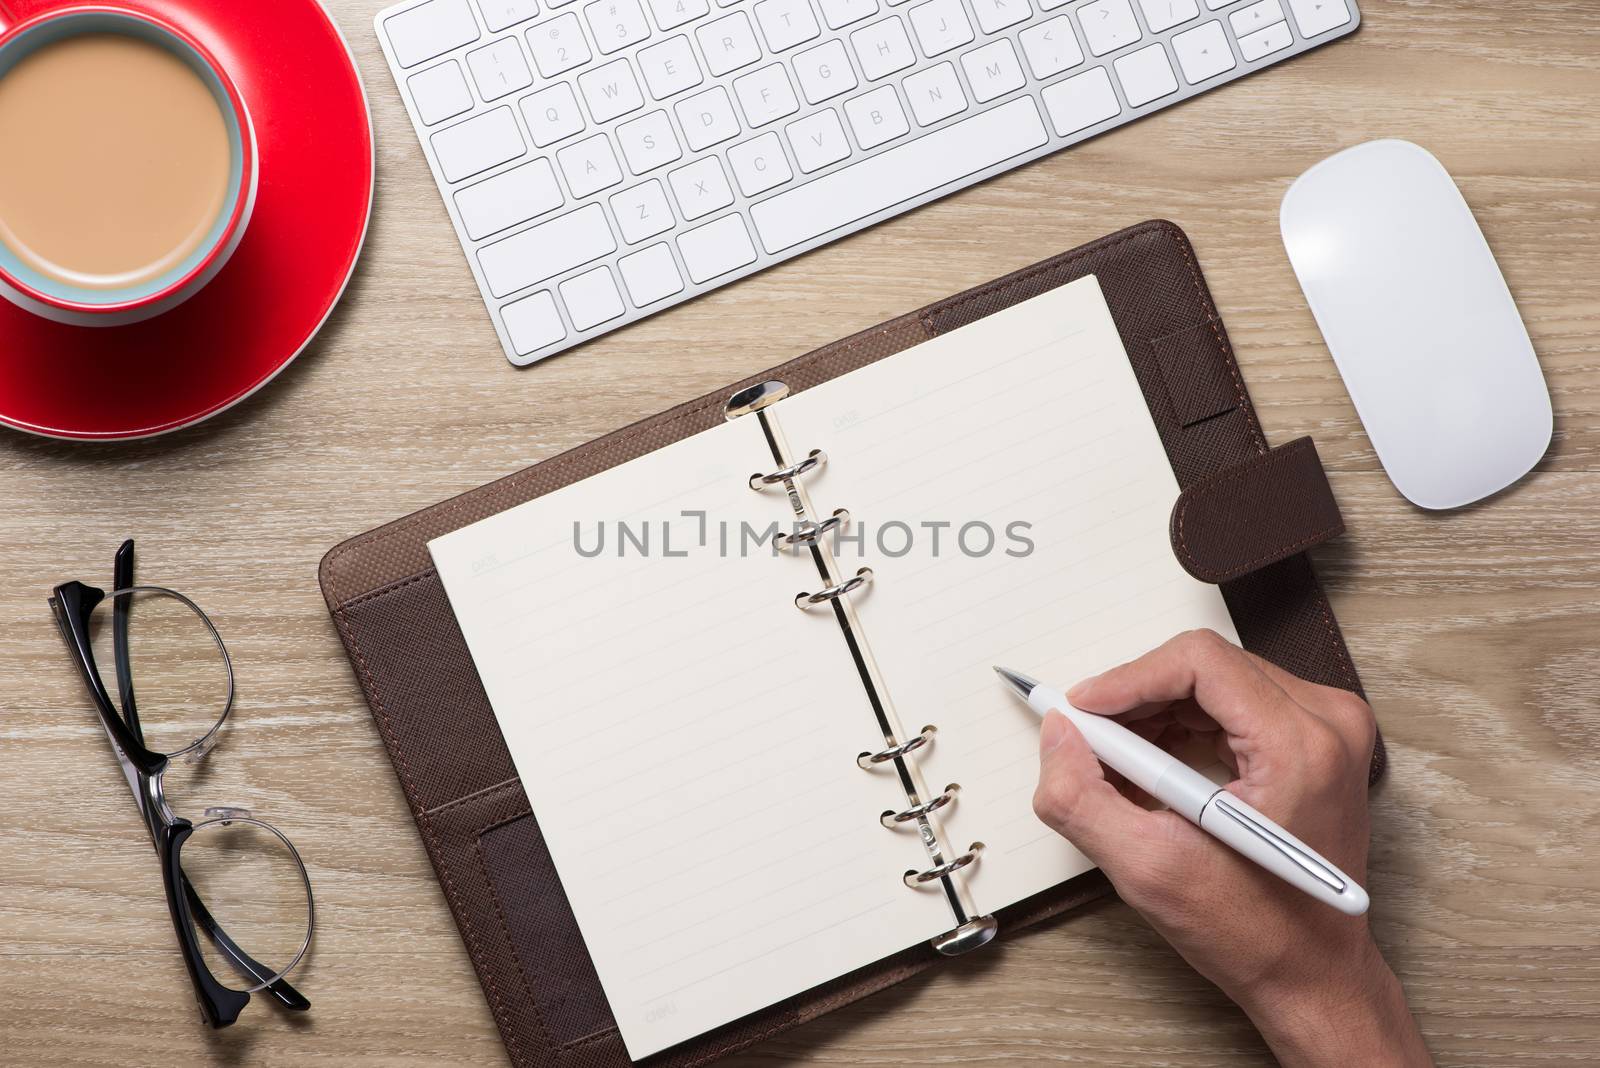 Blank white notebook open, eyeglass, pen and cup of coffee on the desk